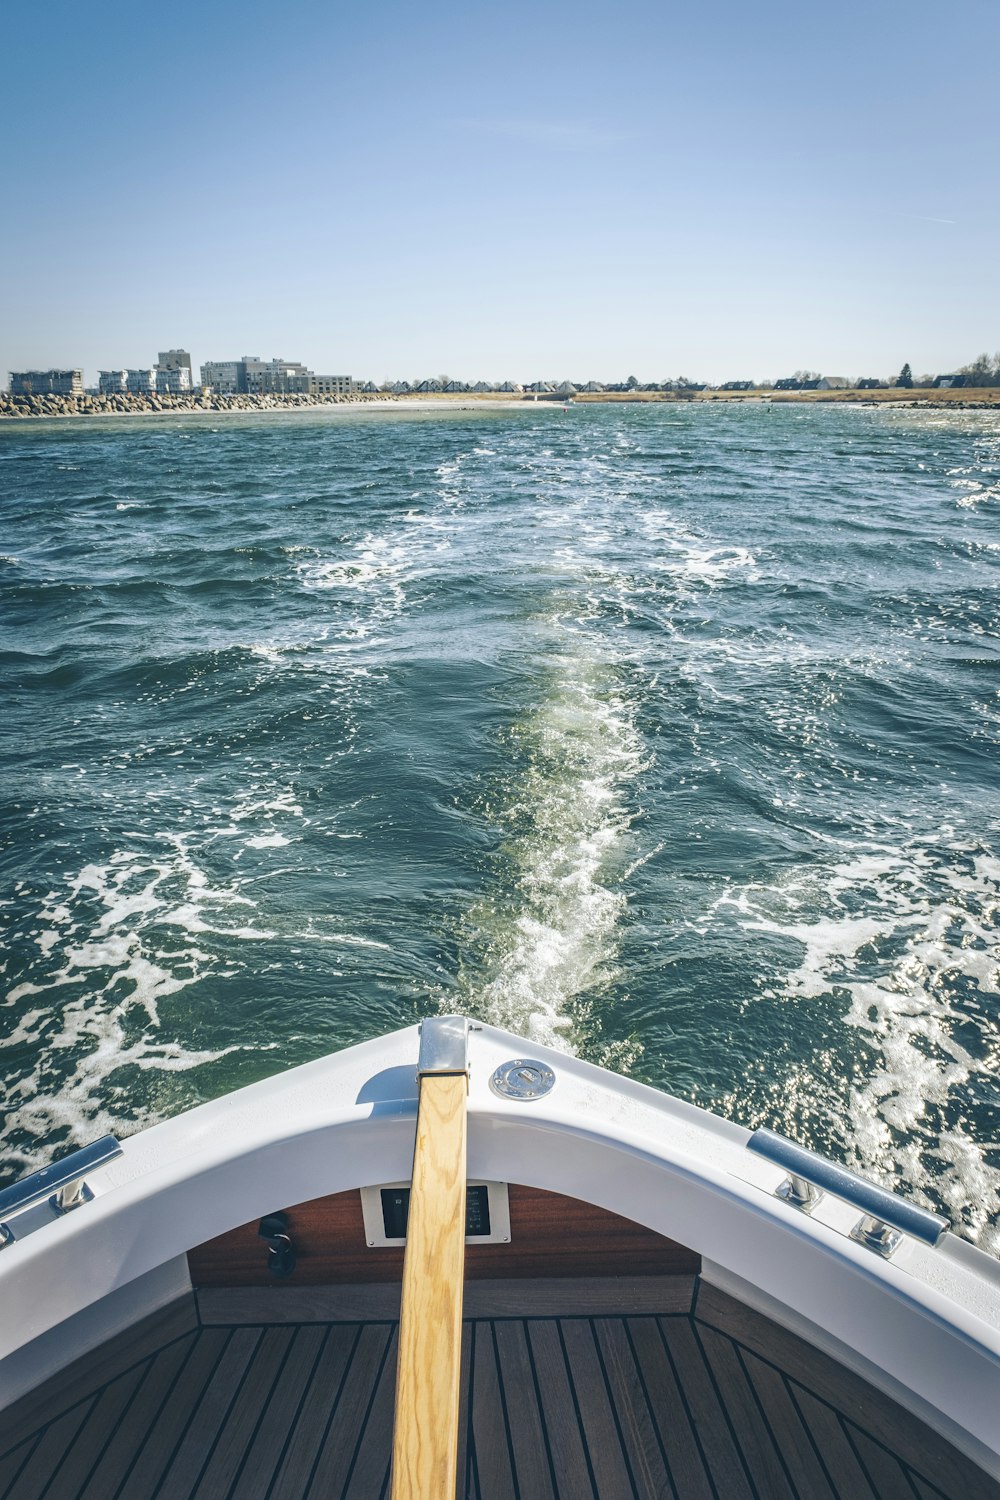 a view of the back of a boat in the water